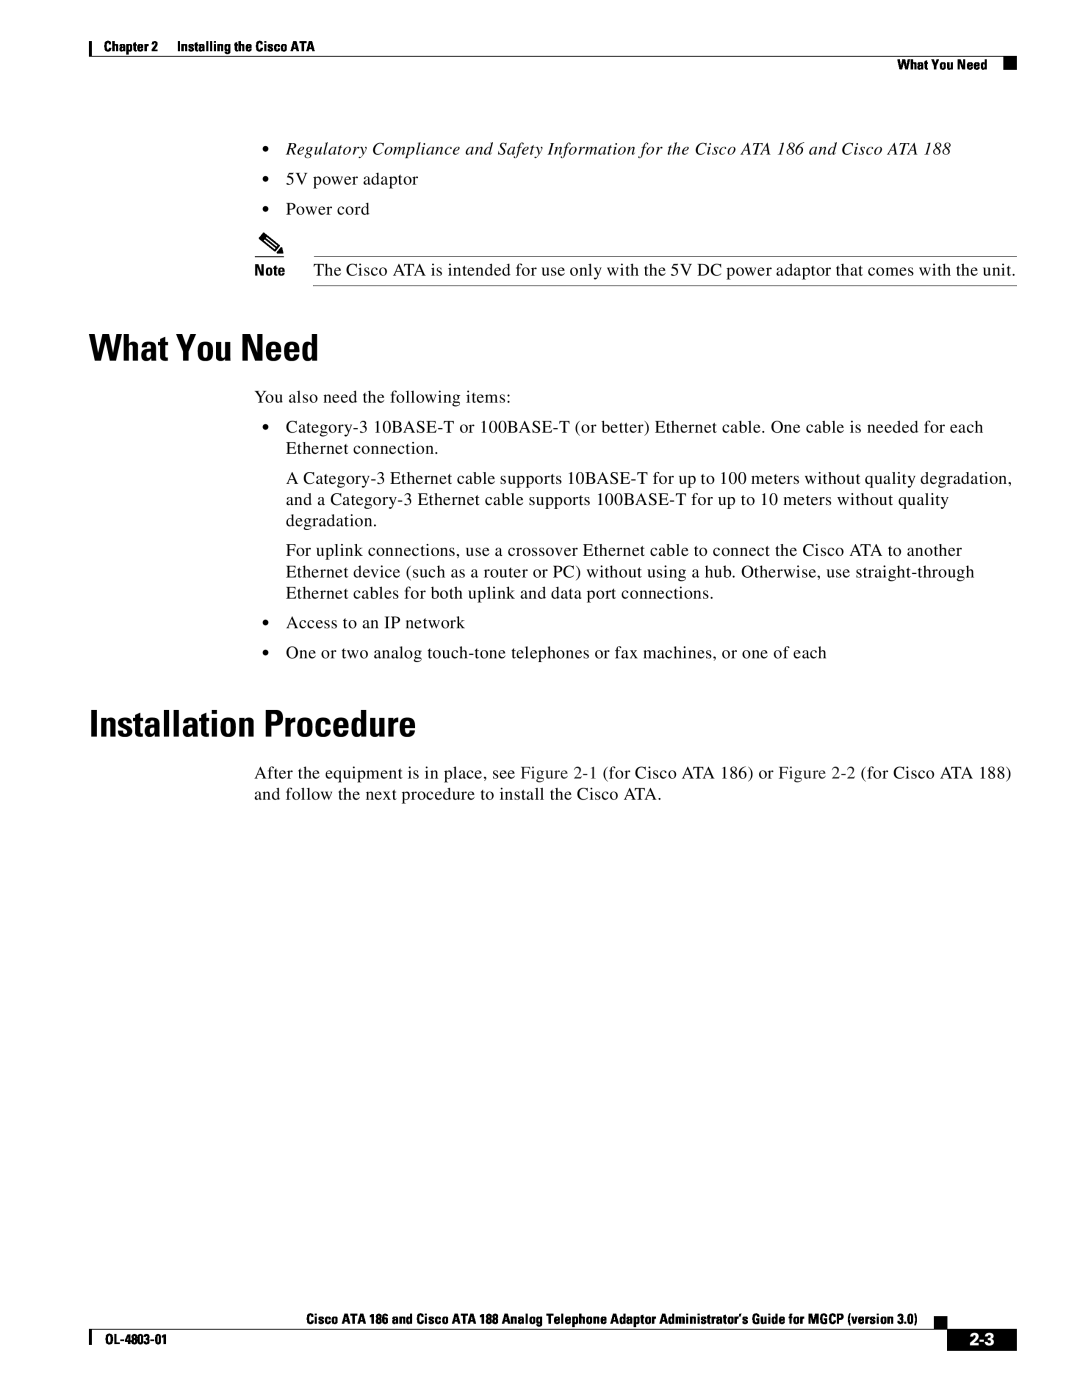 Cisco Systems ATA 186 manual What You Need, Installation Procedure 